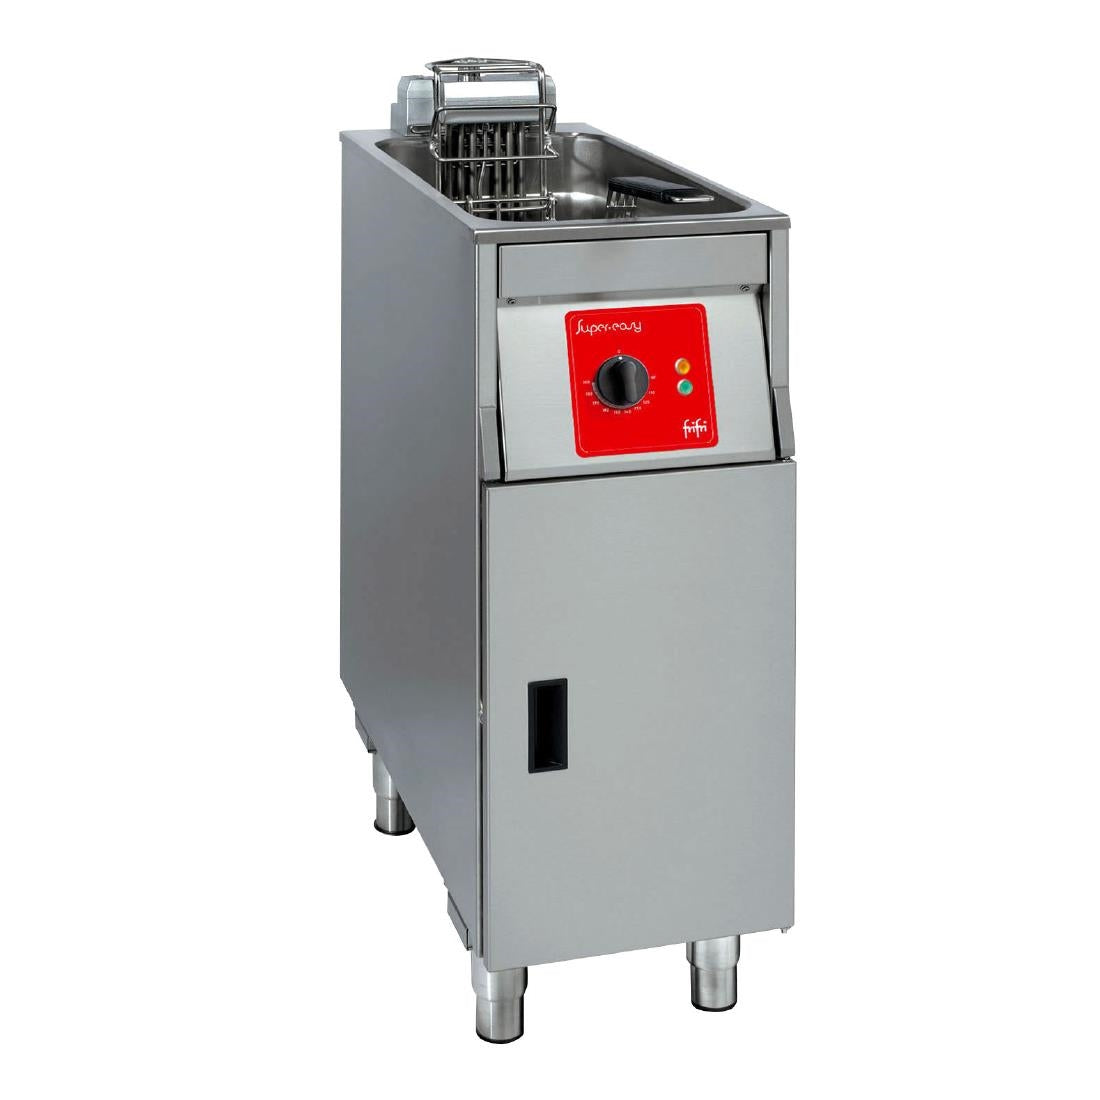 HS052-3PH FriFri Super Easy 311 Electric Free-standing Fryer Single Tank Single Basket with Filtration 15kW Three Phase